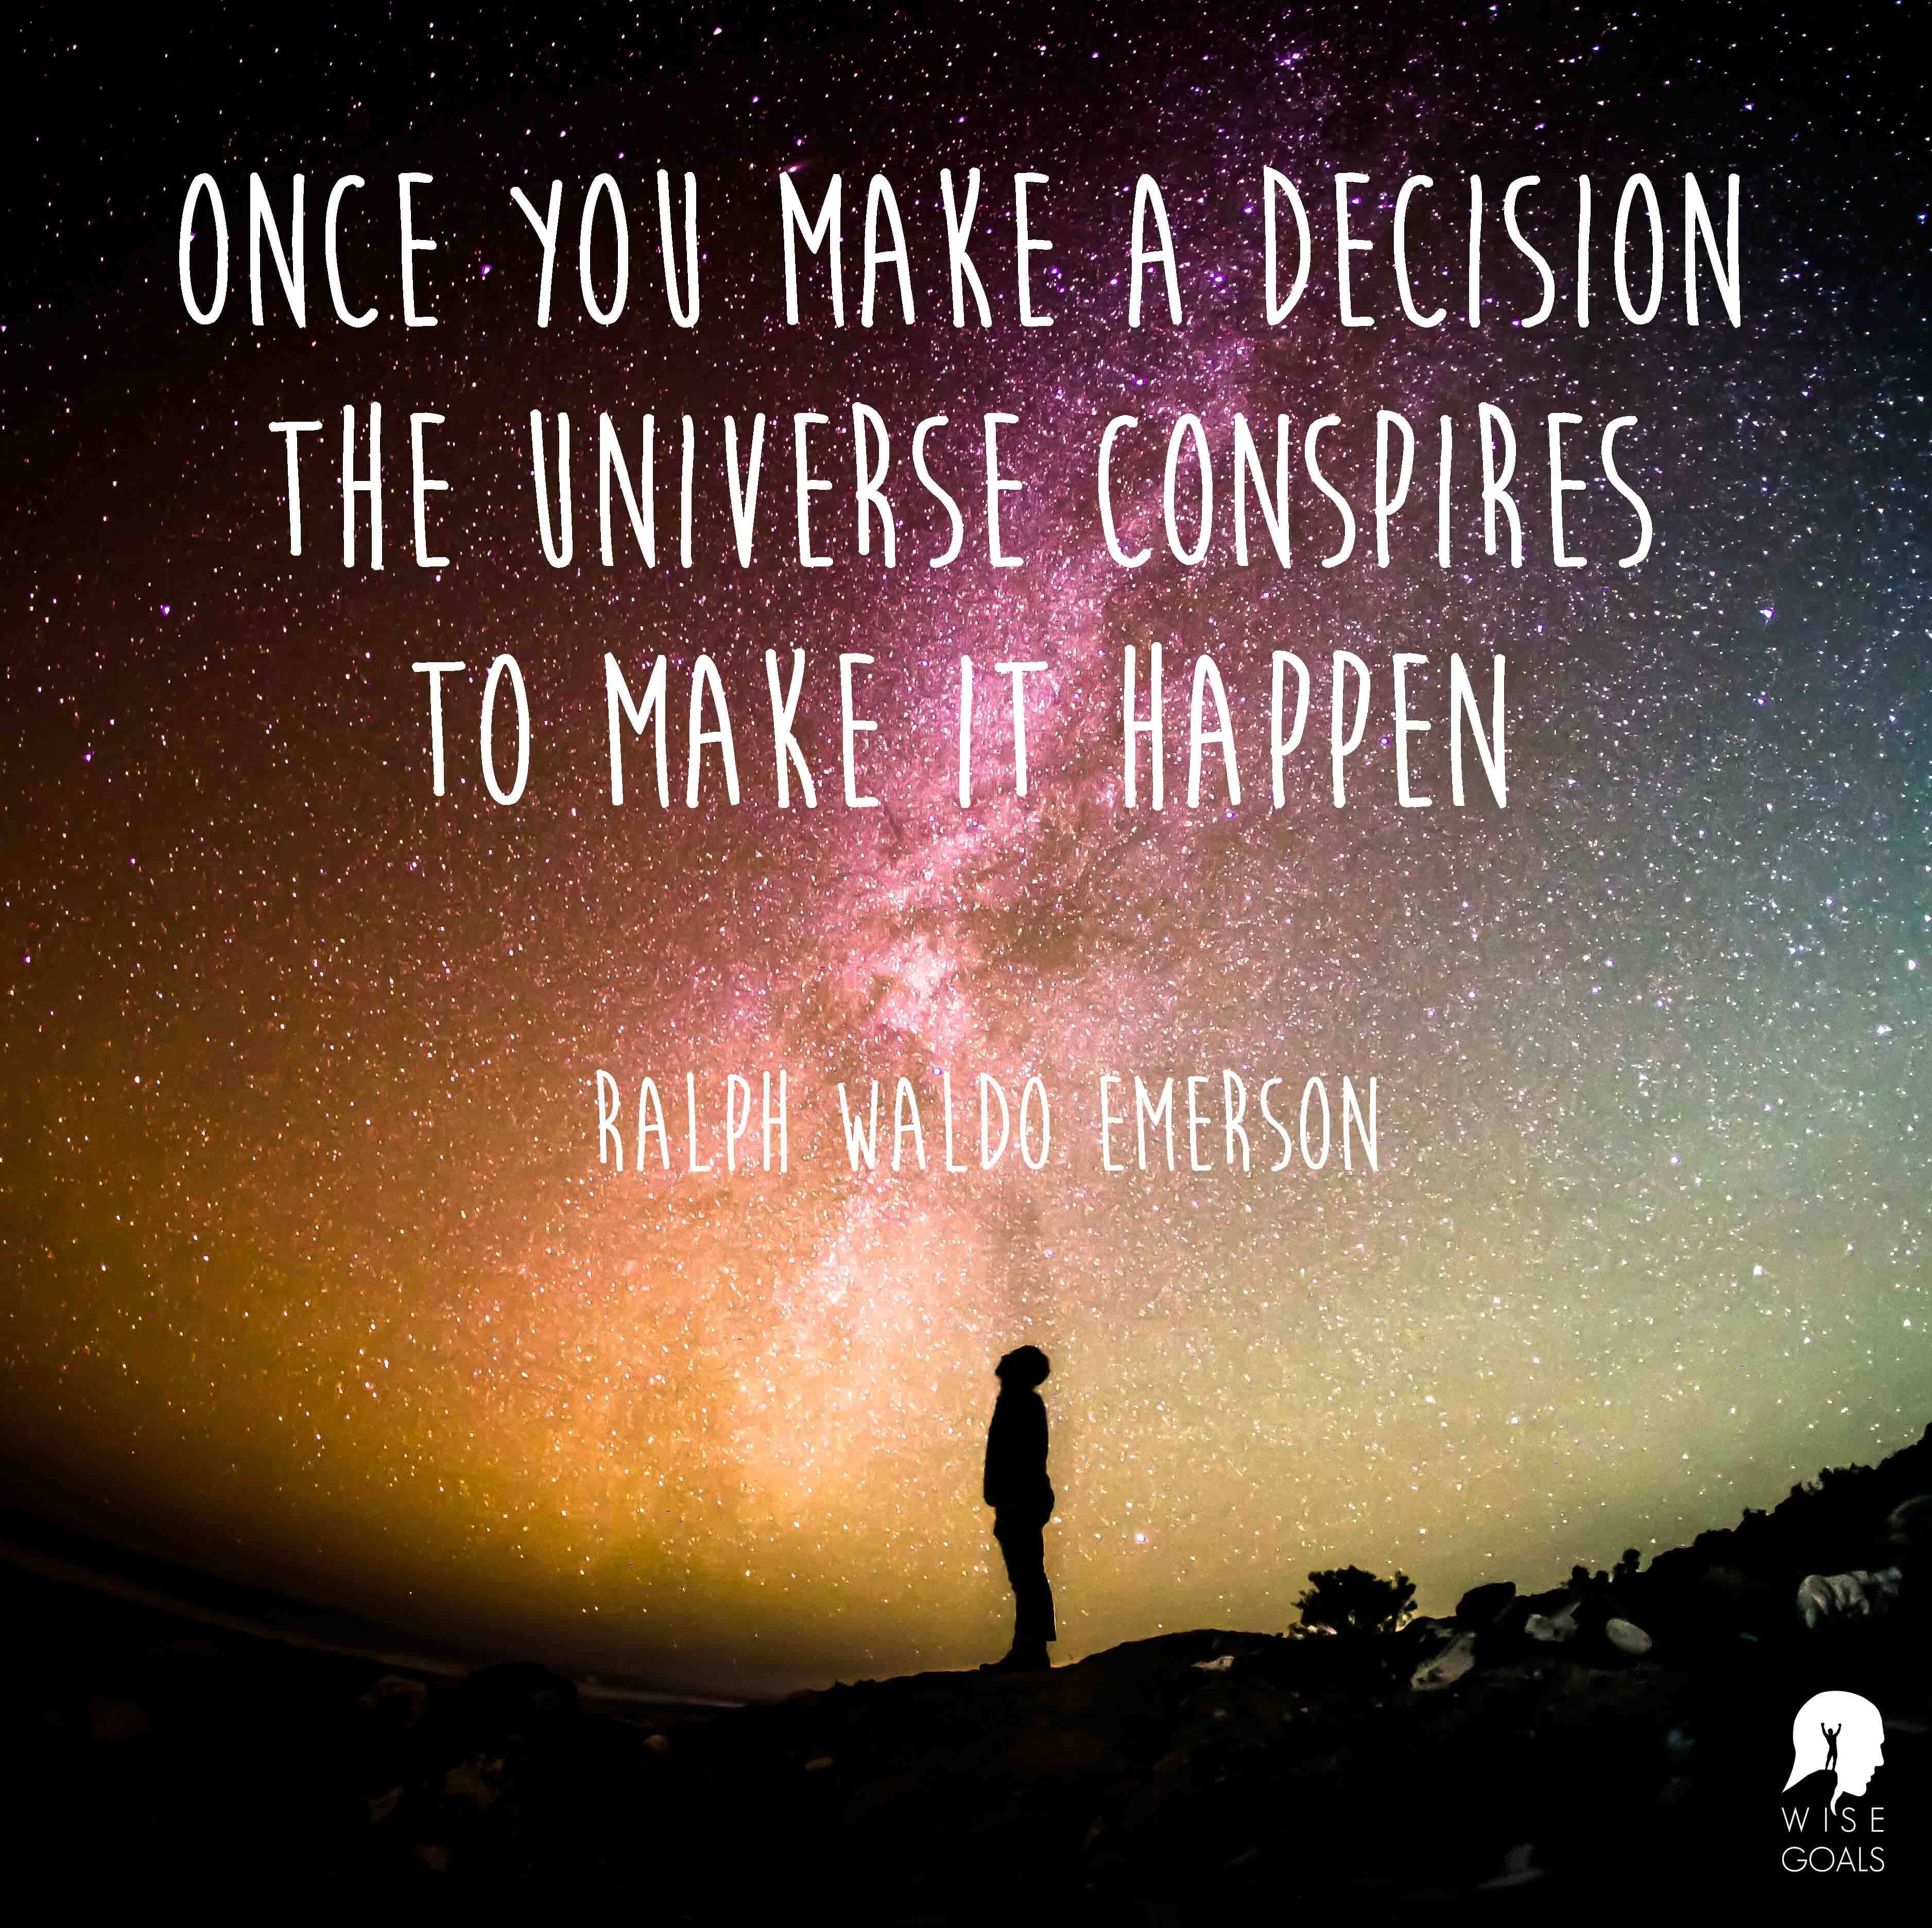 Emerson - once you make a decision the universe conspires to make it happen quote